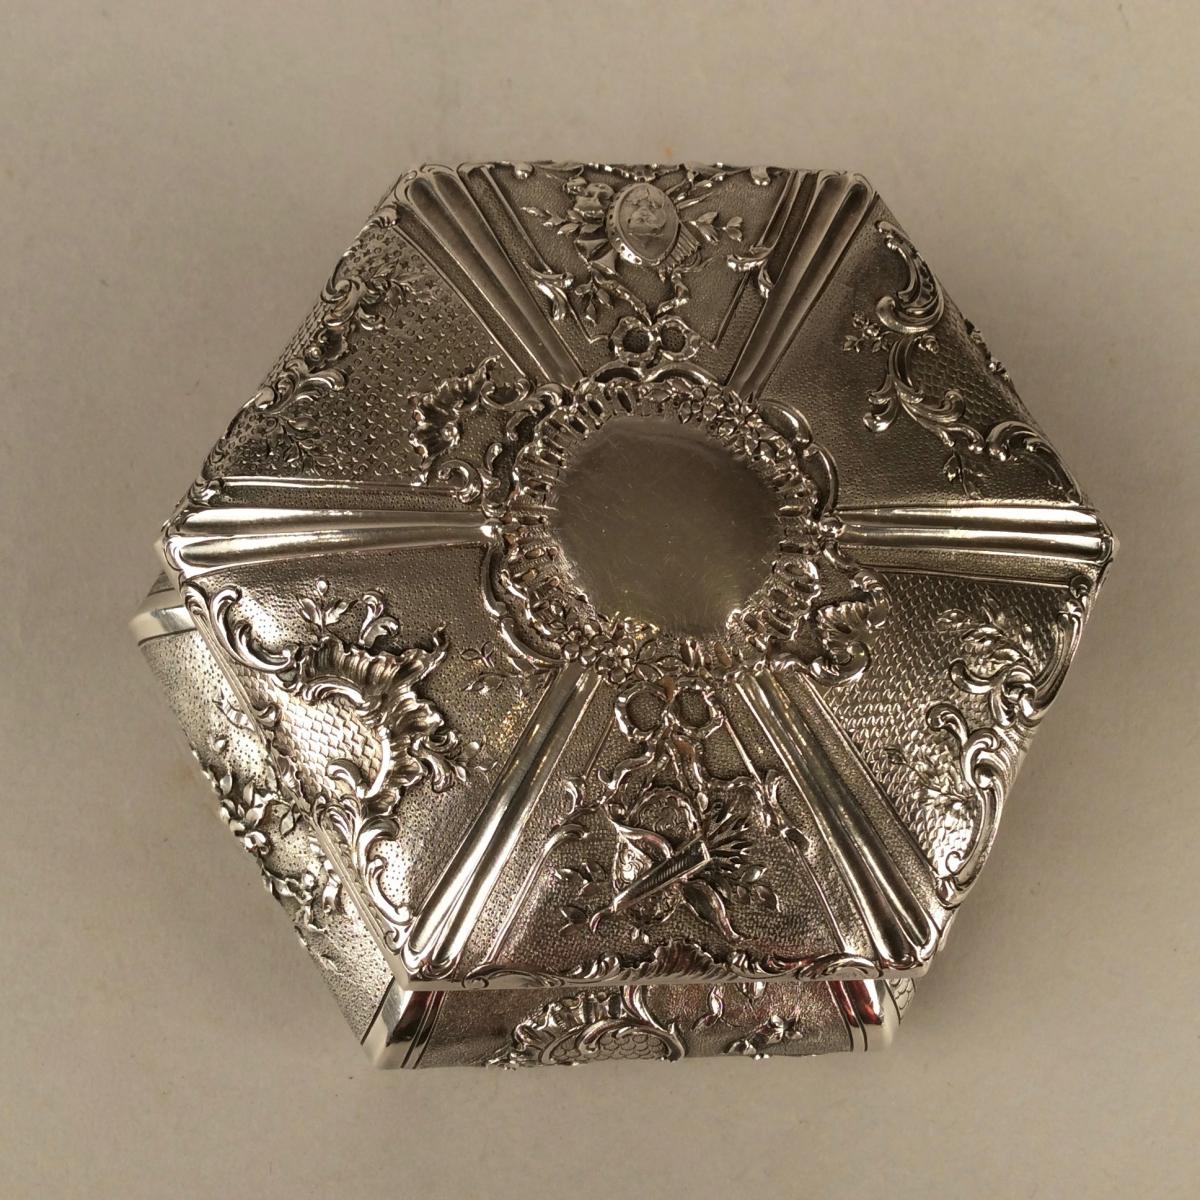 Silver Hexagonal Box From The Nineteenth Century